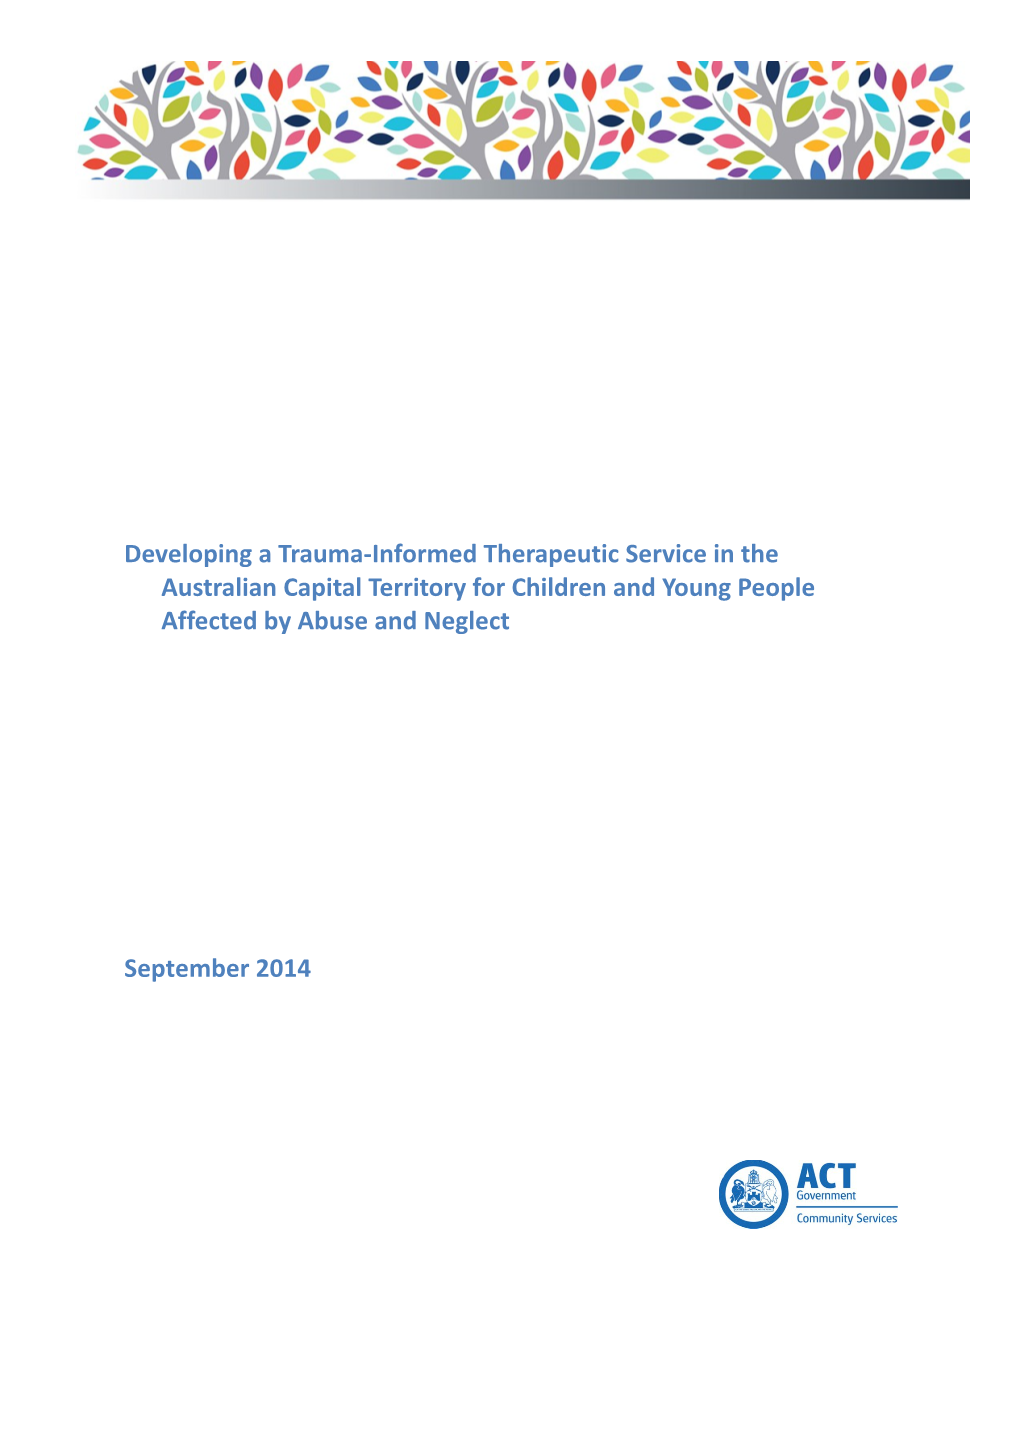 Developing a Trauma Informed Theraputic Service in the Australian Capital Territory For